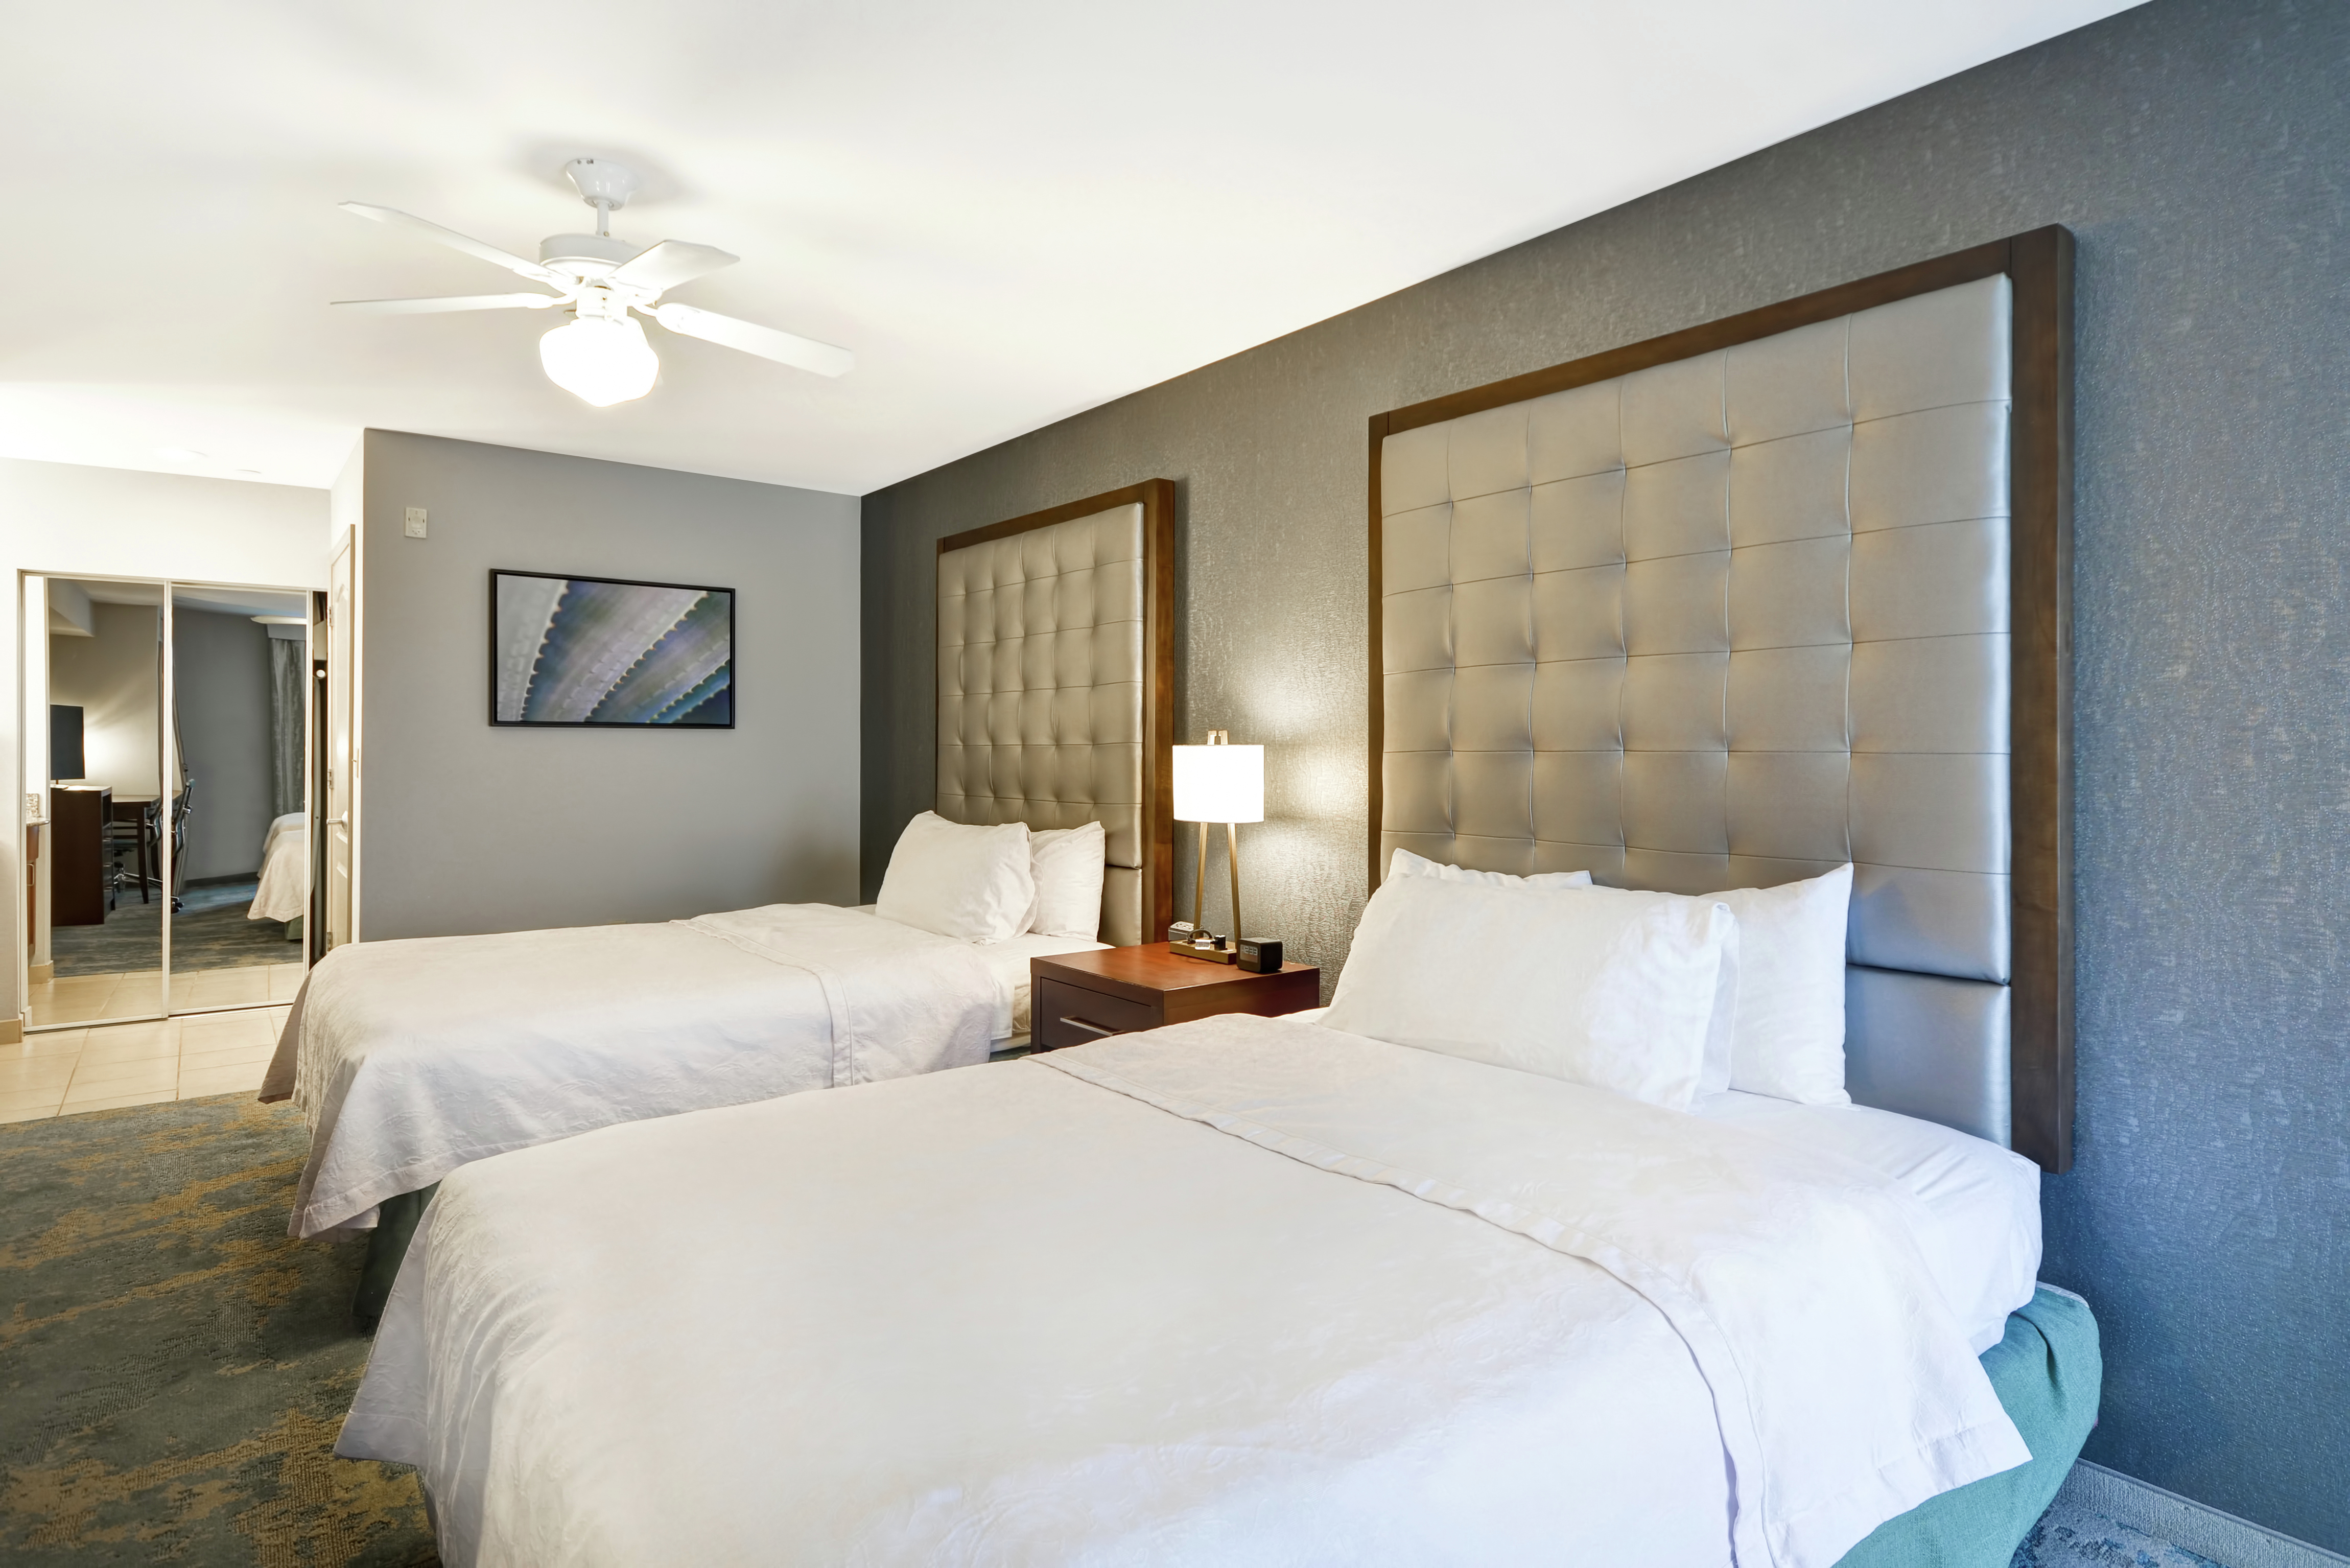 Ceiling Fan Above Two Queen Beds and Illuminated Lamp on Bedside Table in Guest Room